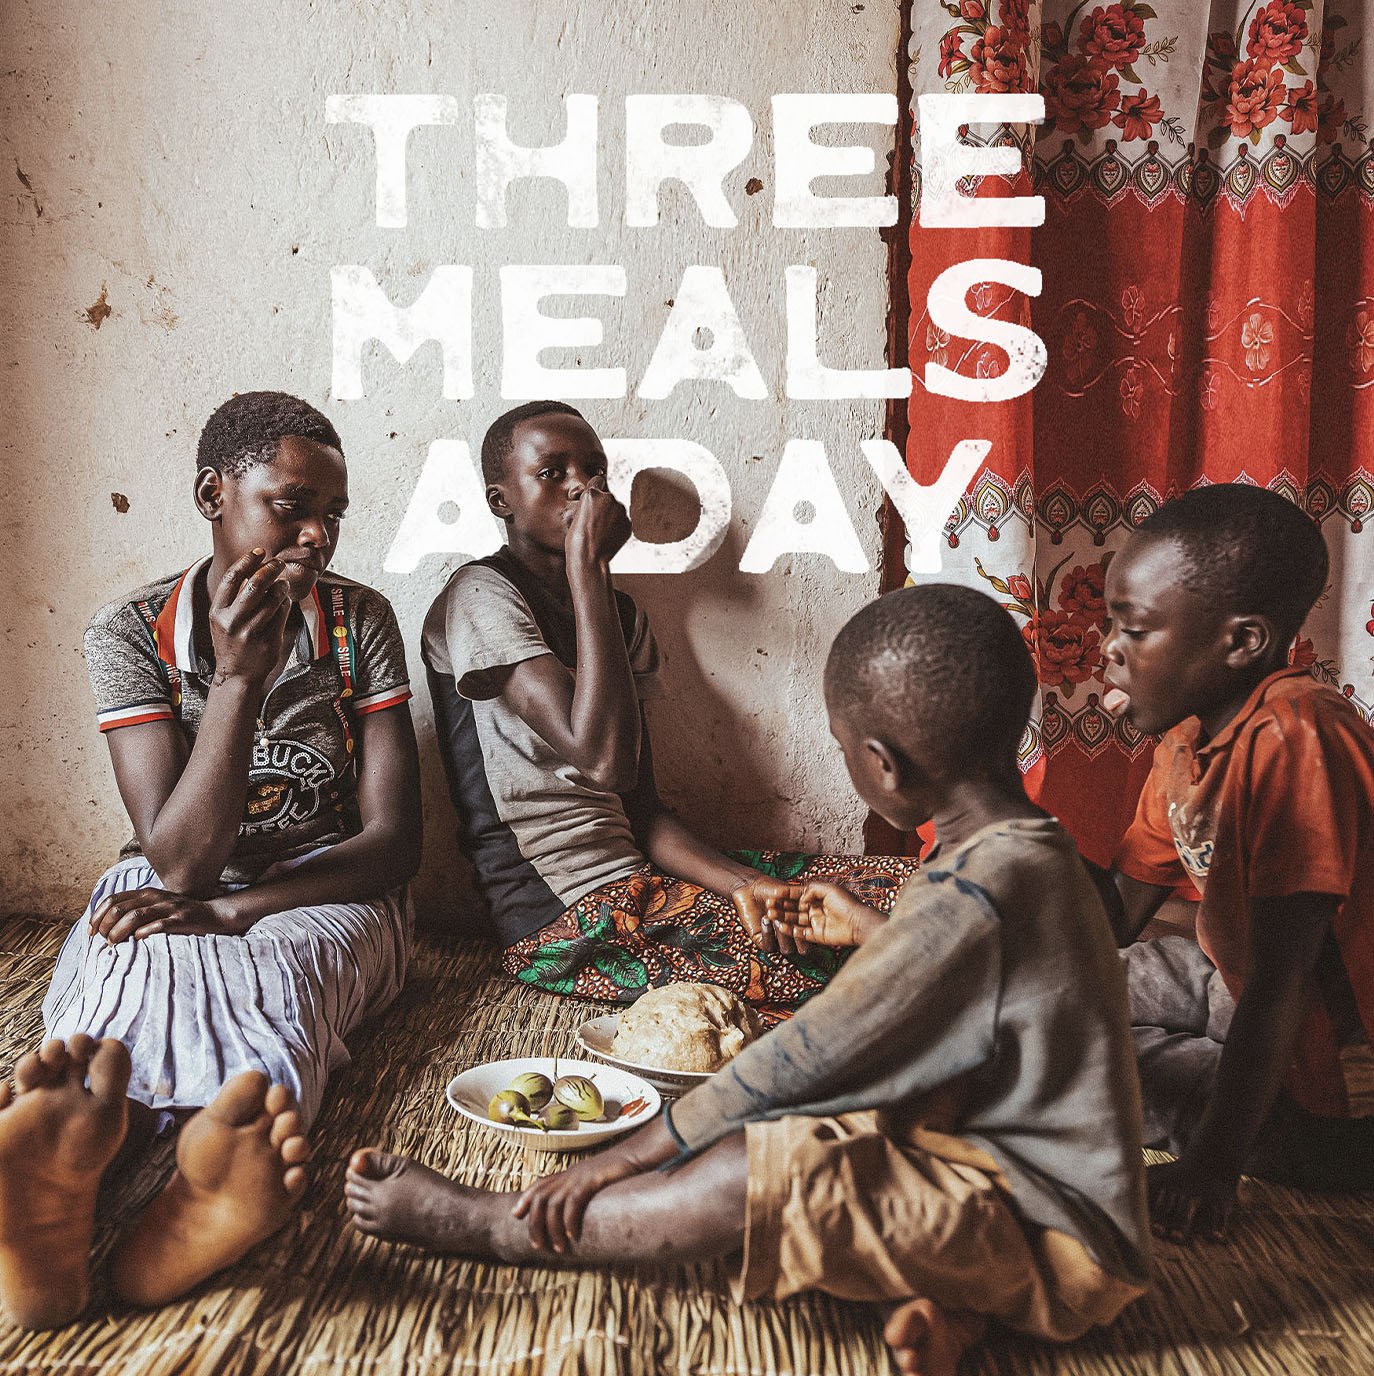 Three Meals a Day